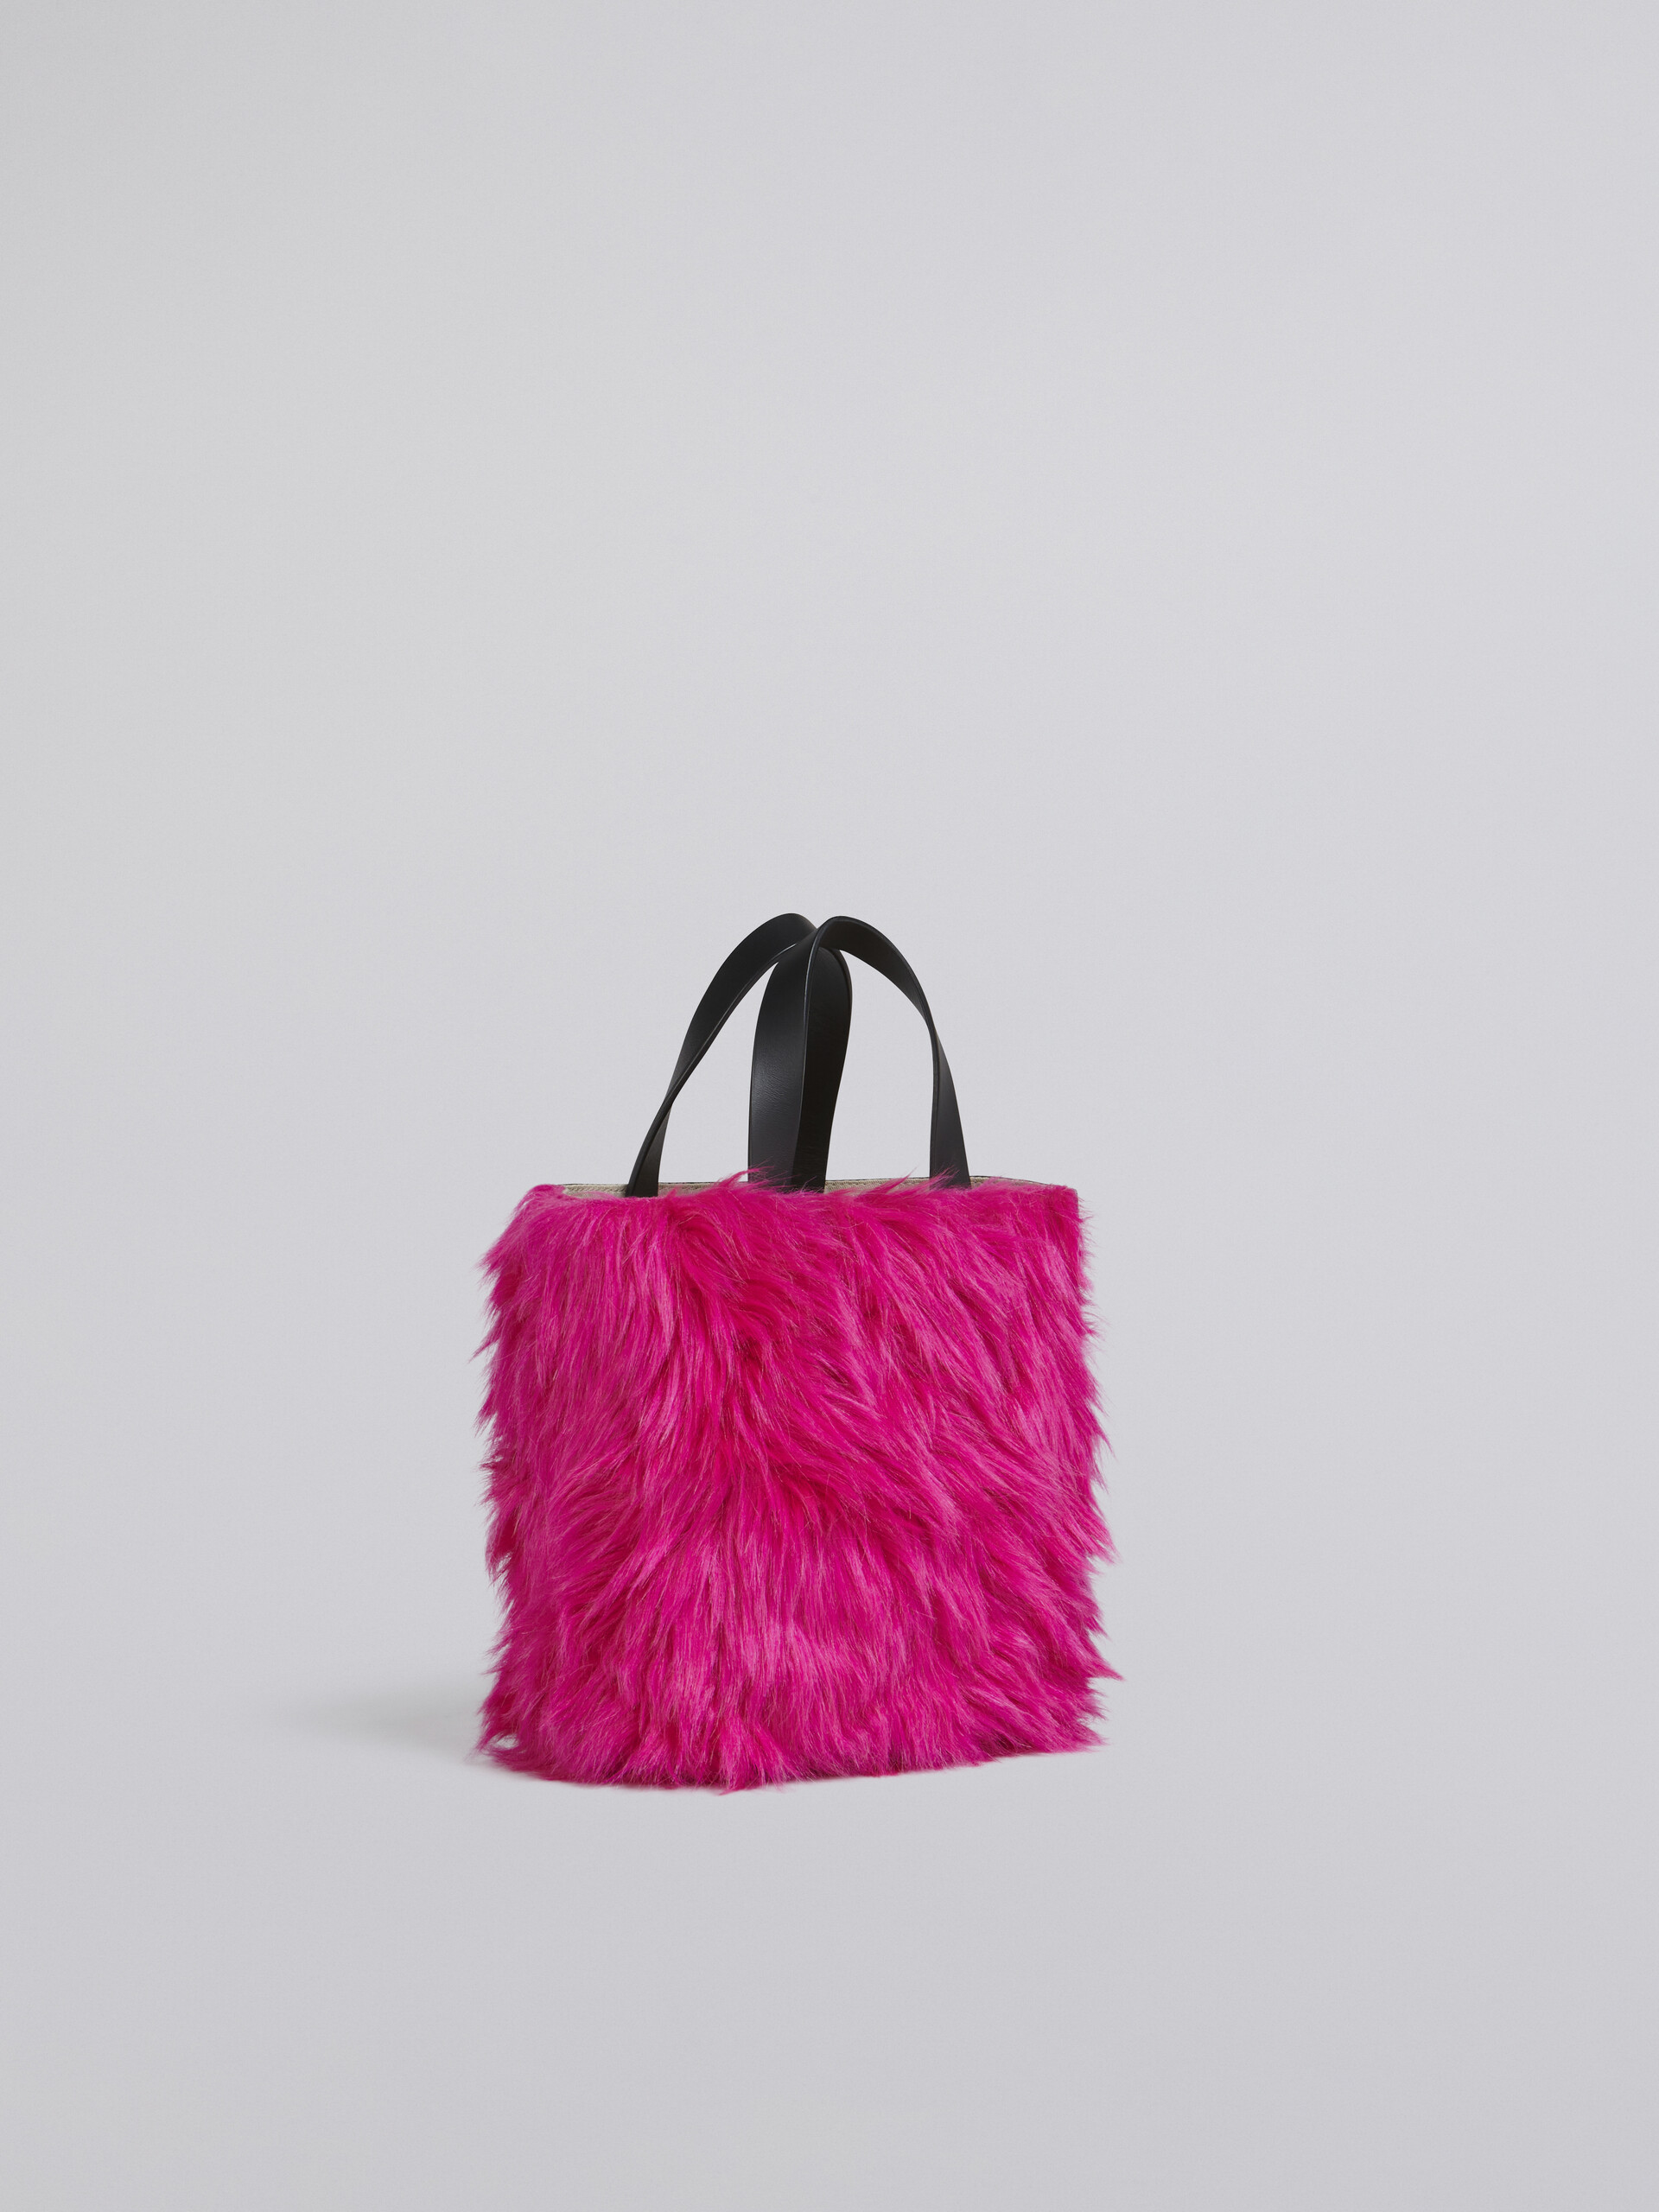 Teddy and calf leather MUSEO SOFT bag - Shopping Bags - Image 6